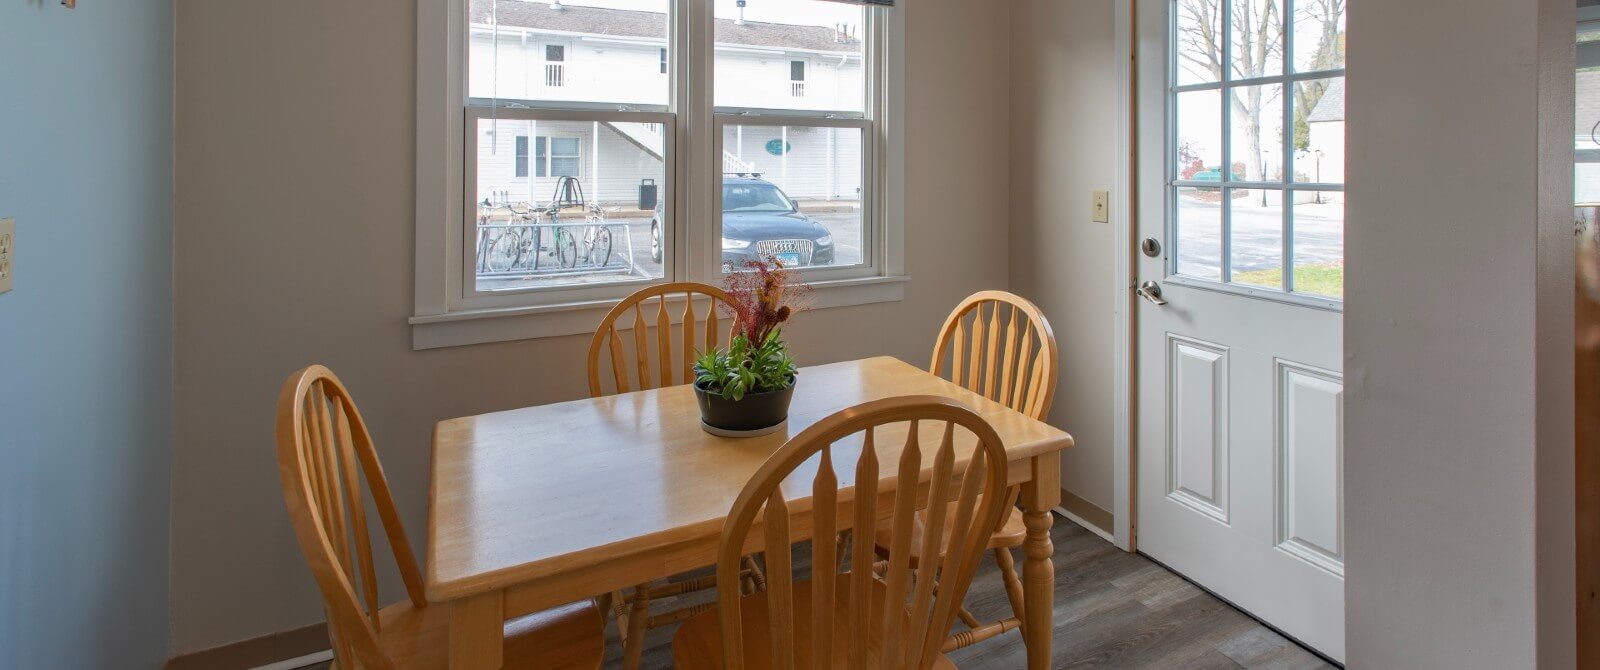 Small breakfast nook with wood table with four chairs and large picture window next to a door